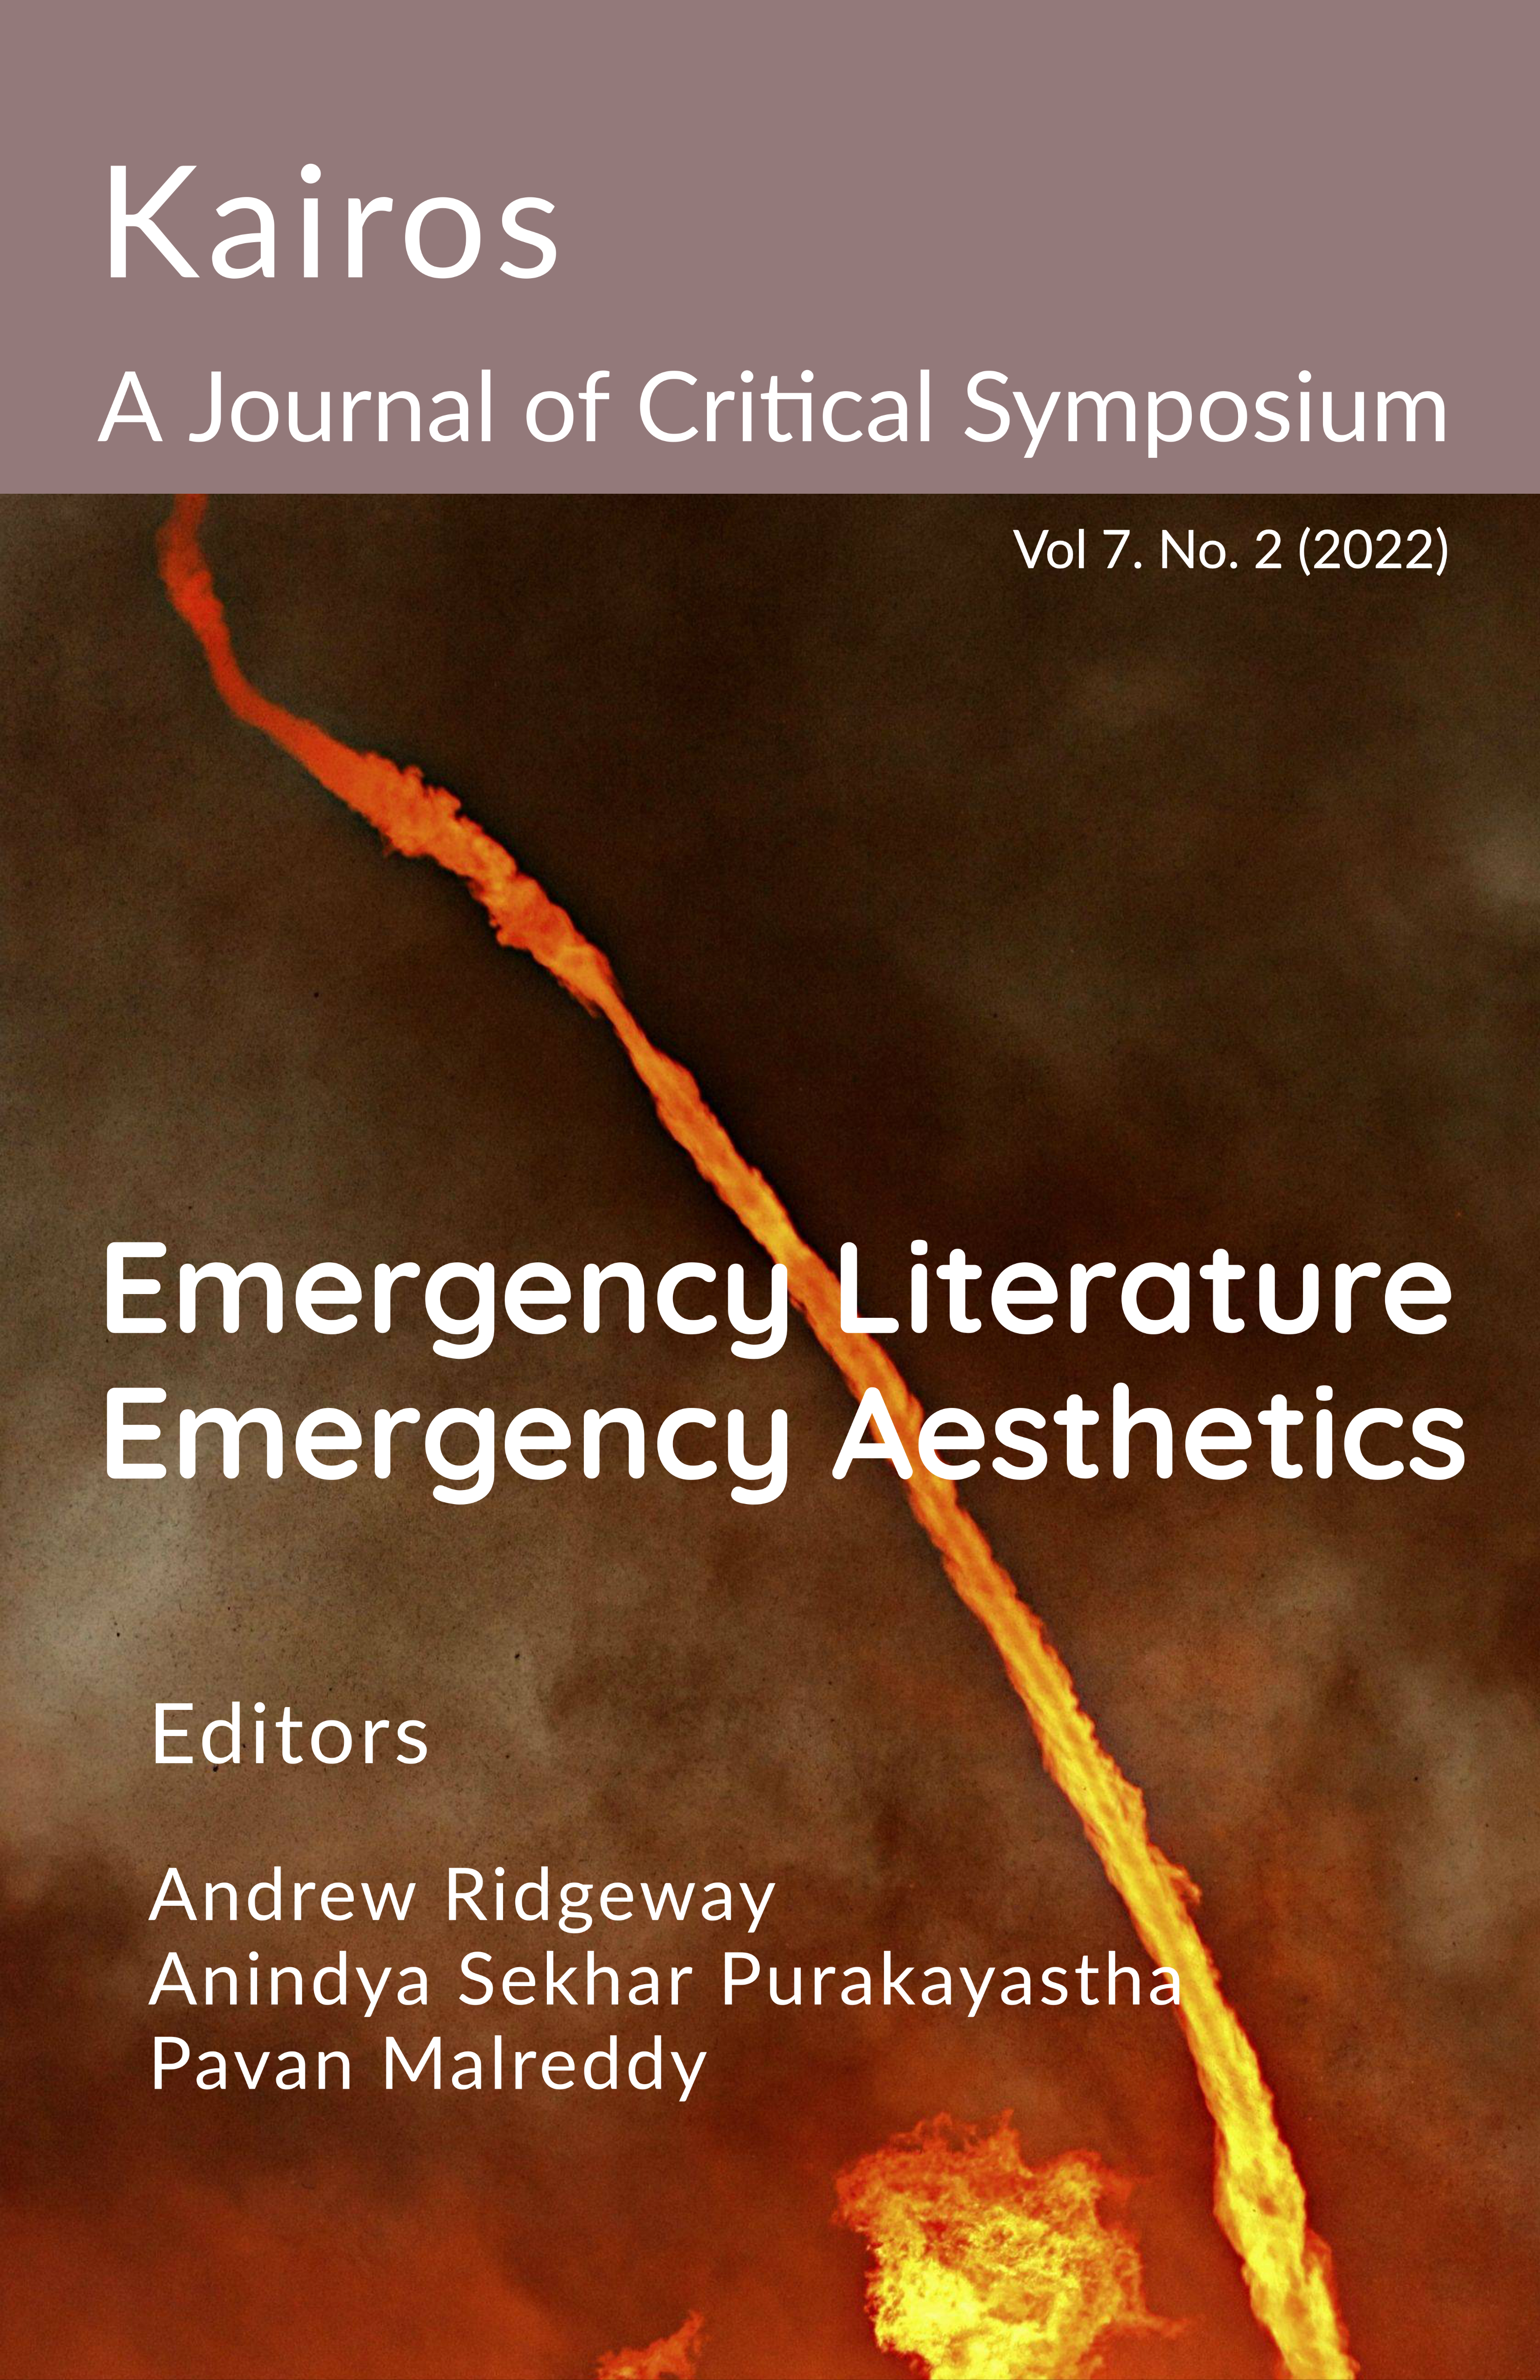 					View Vol. 7 No. 2 (2022): Special Issue: Emergency Literature, Emergency Aesthetics 
				